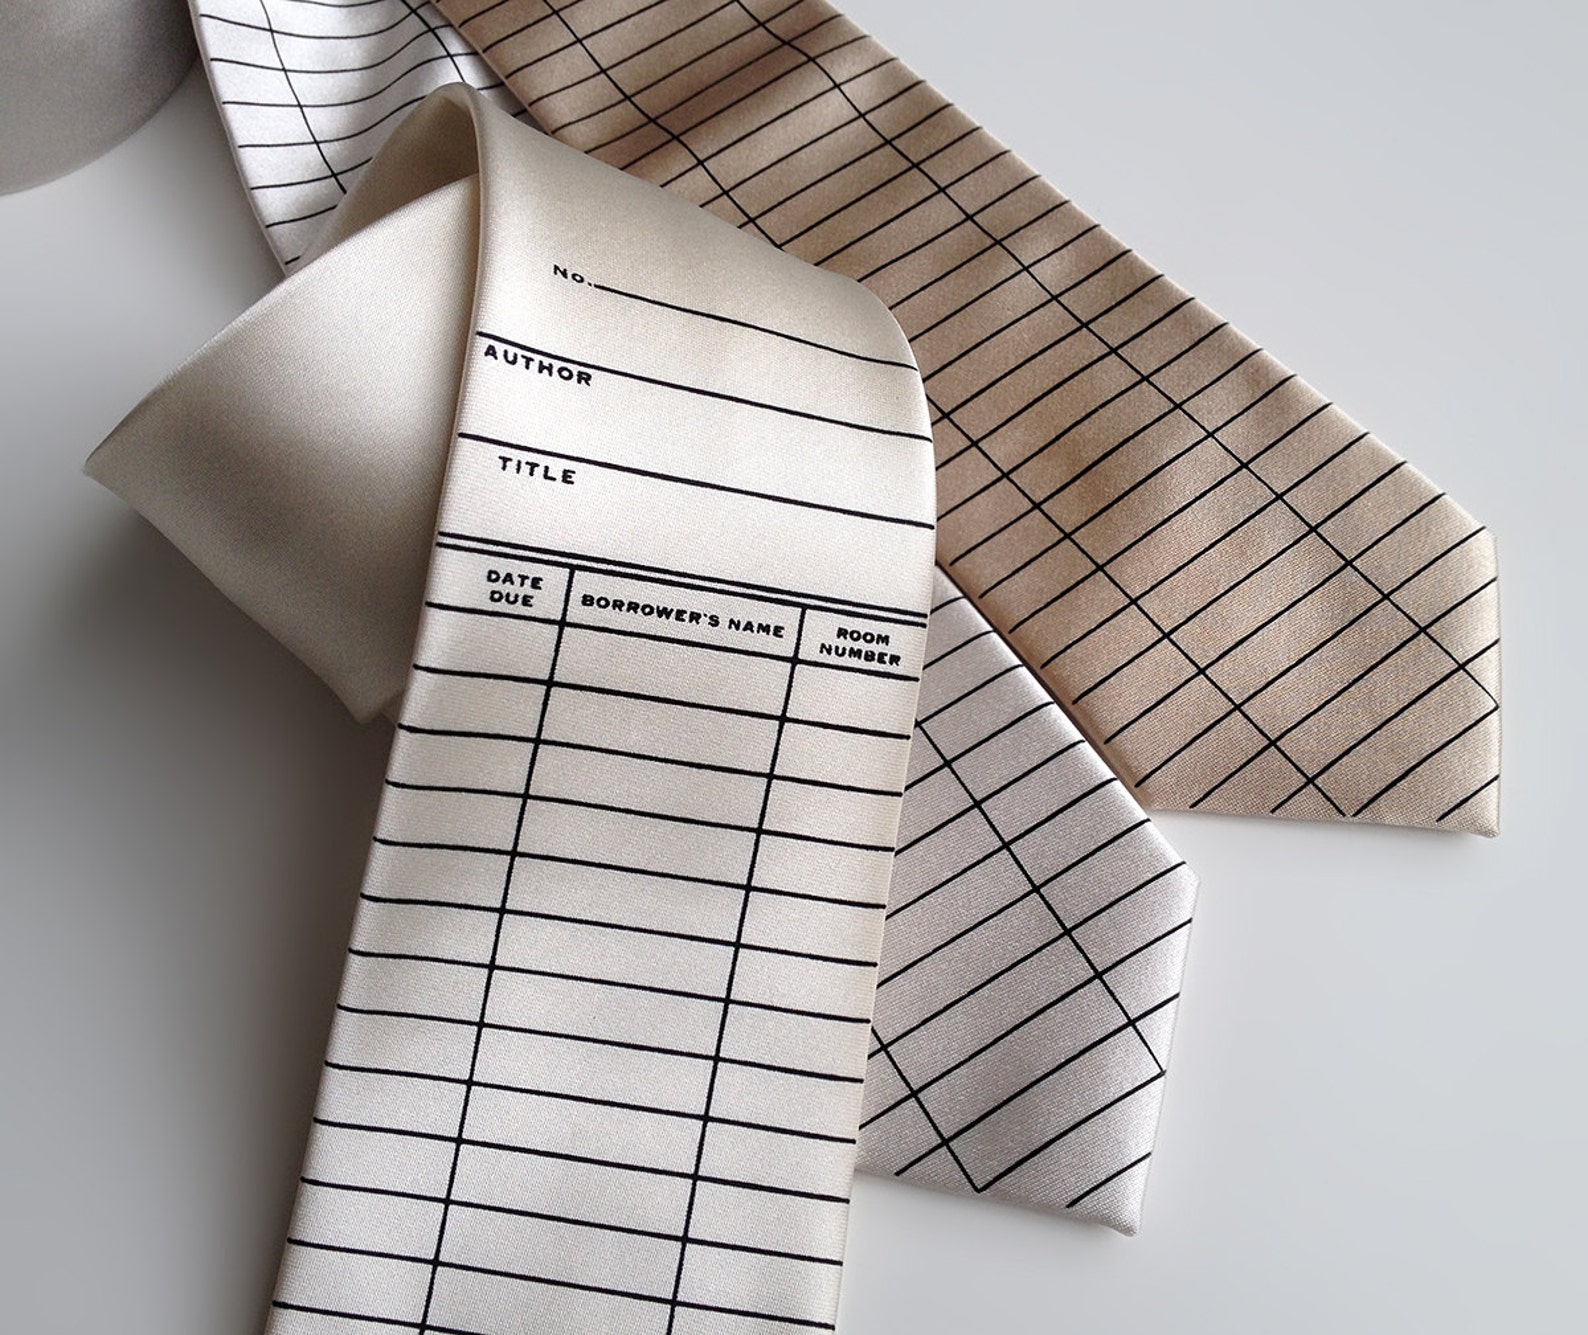 Image of three neckties with a due date pattern. All of the ties are cream colored and the text is black. 